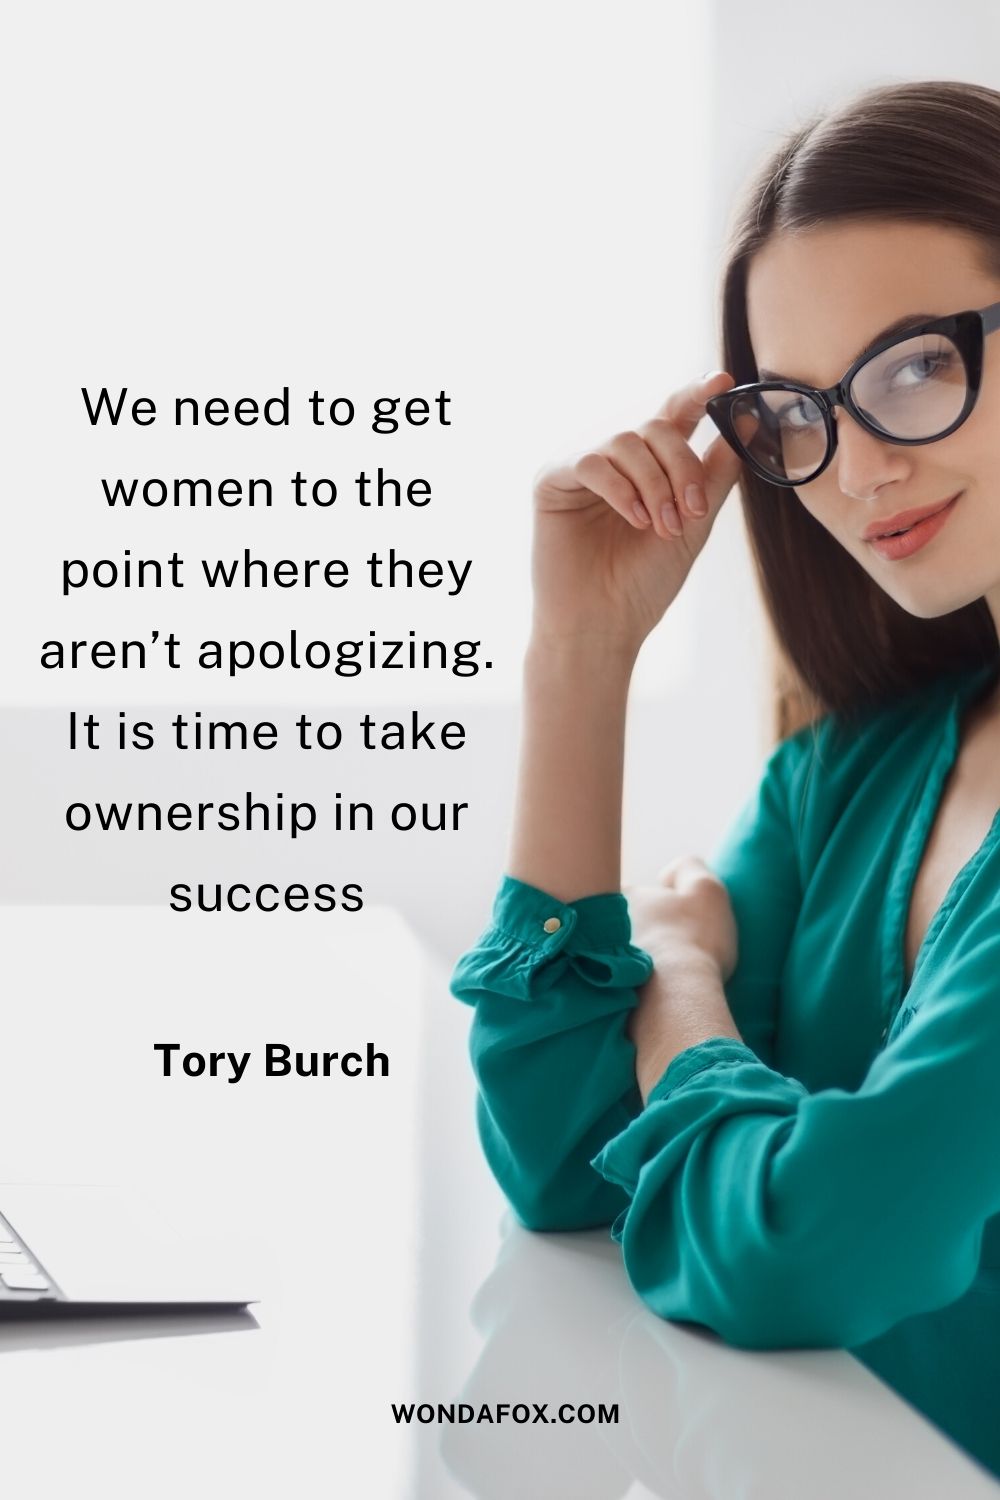 We need to get women to the point where they aren’t apologizing. It is time to take ownership in our success